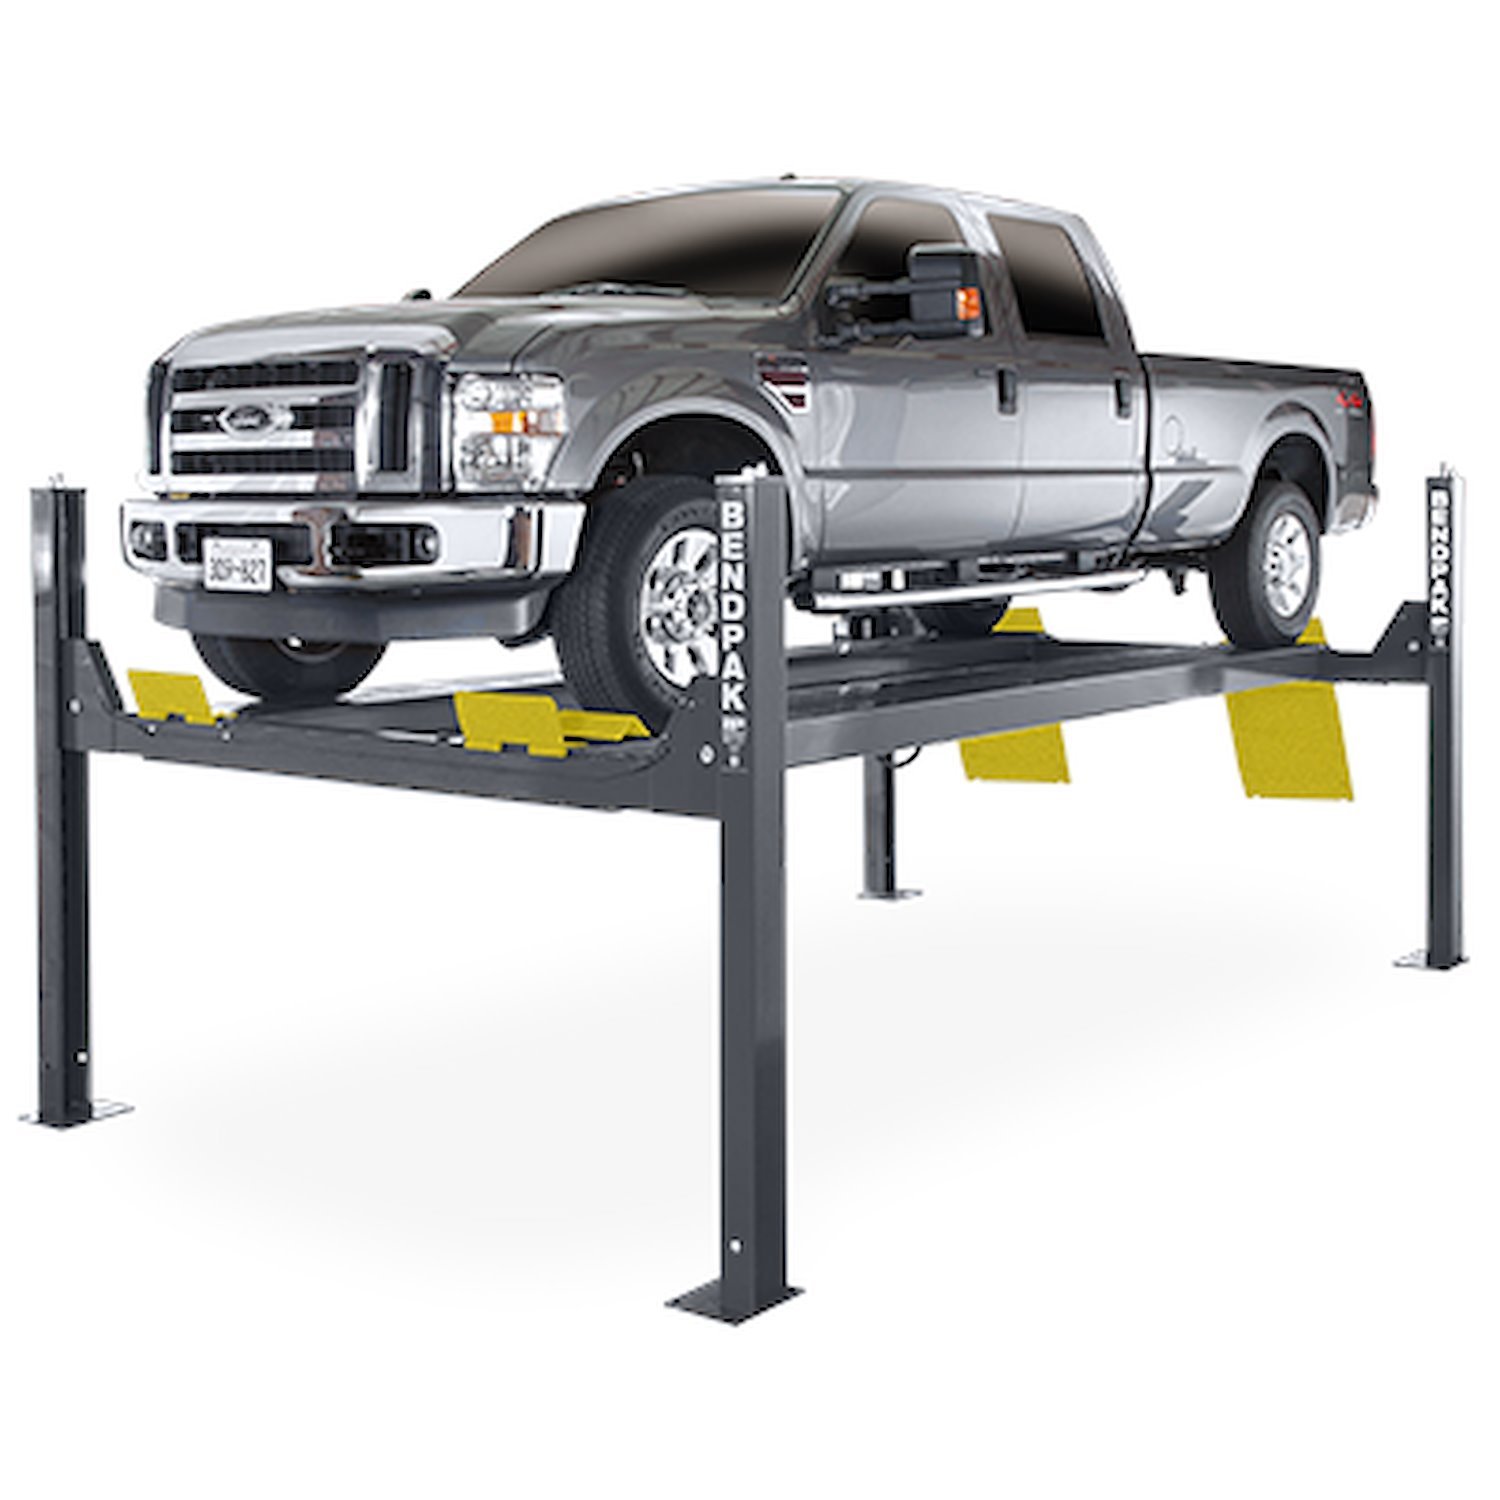 HDS-14X Extended Four-Post Lift, 14,000-lb. Capacity